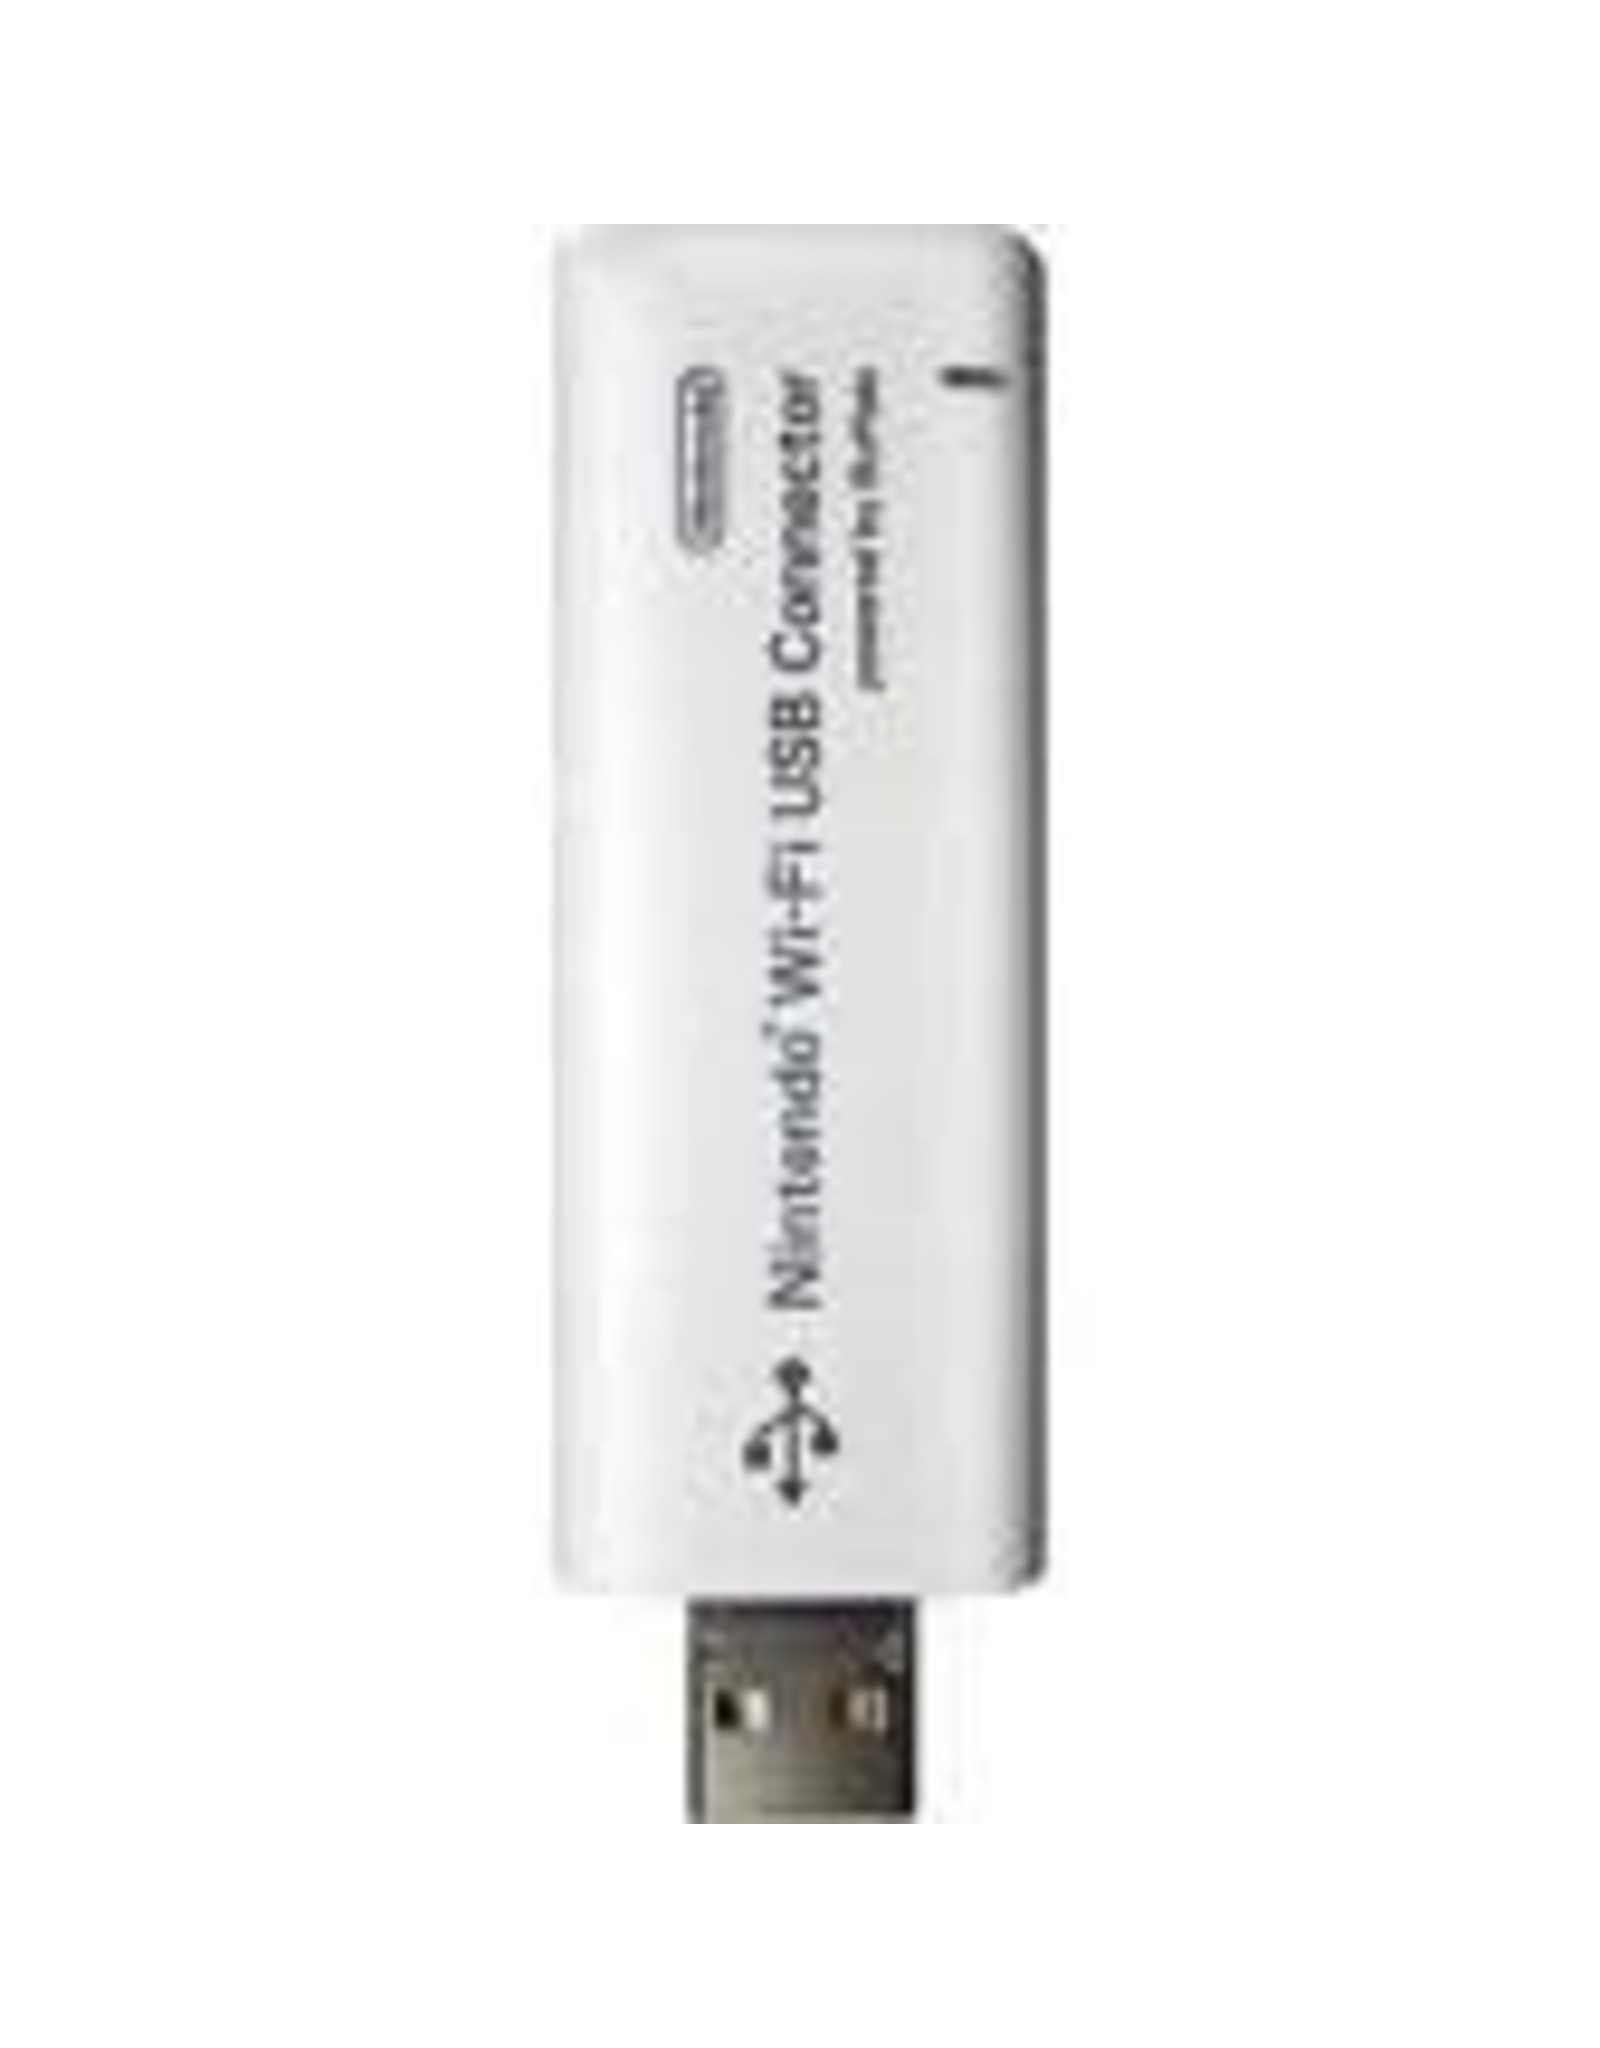 Nintendo Ds Wifi Usb Connector Video Game Trader